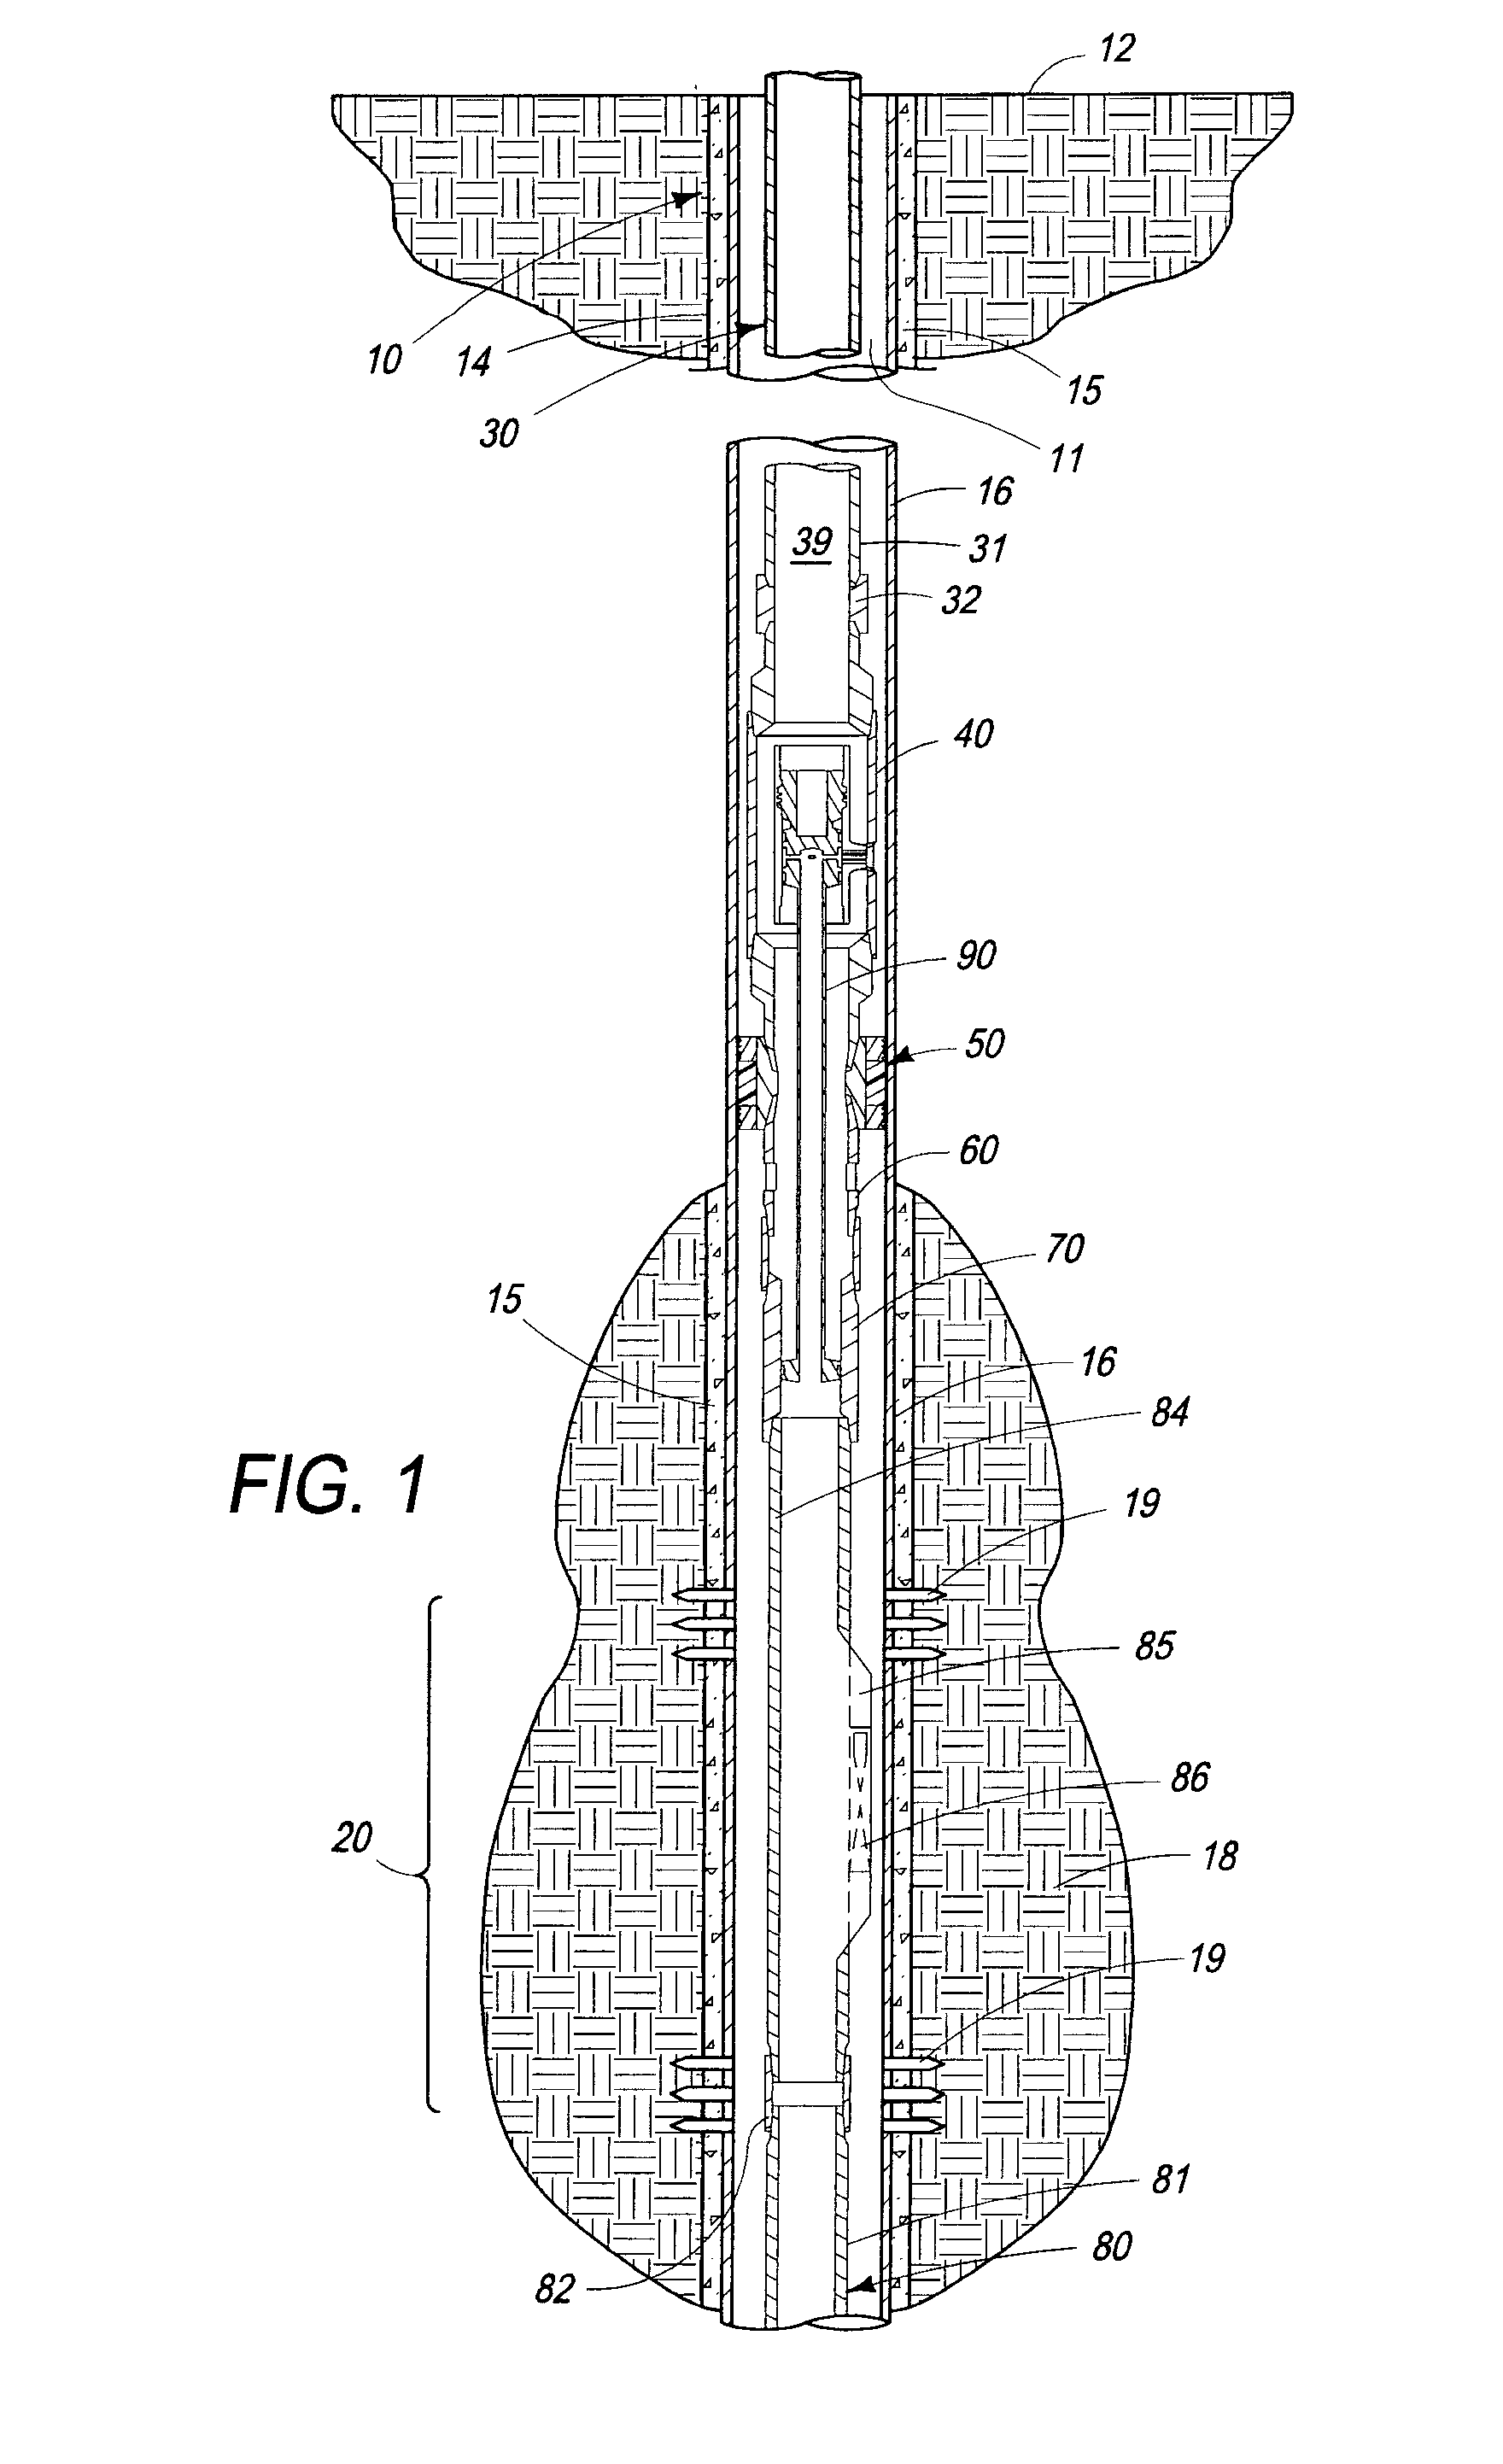 Apparatus, assembly and process for injecting fluid into a subterranean well